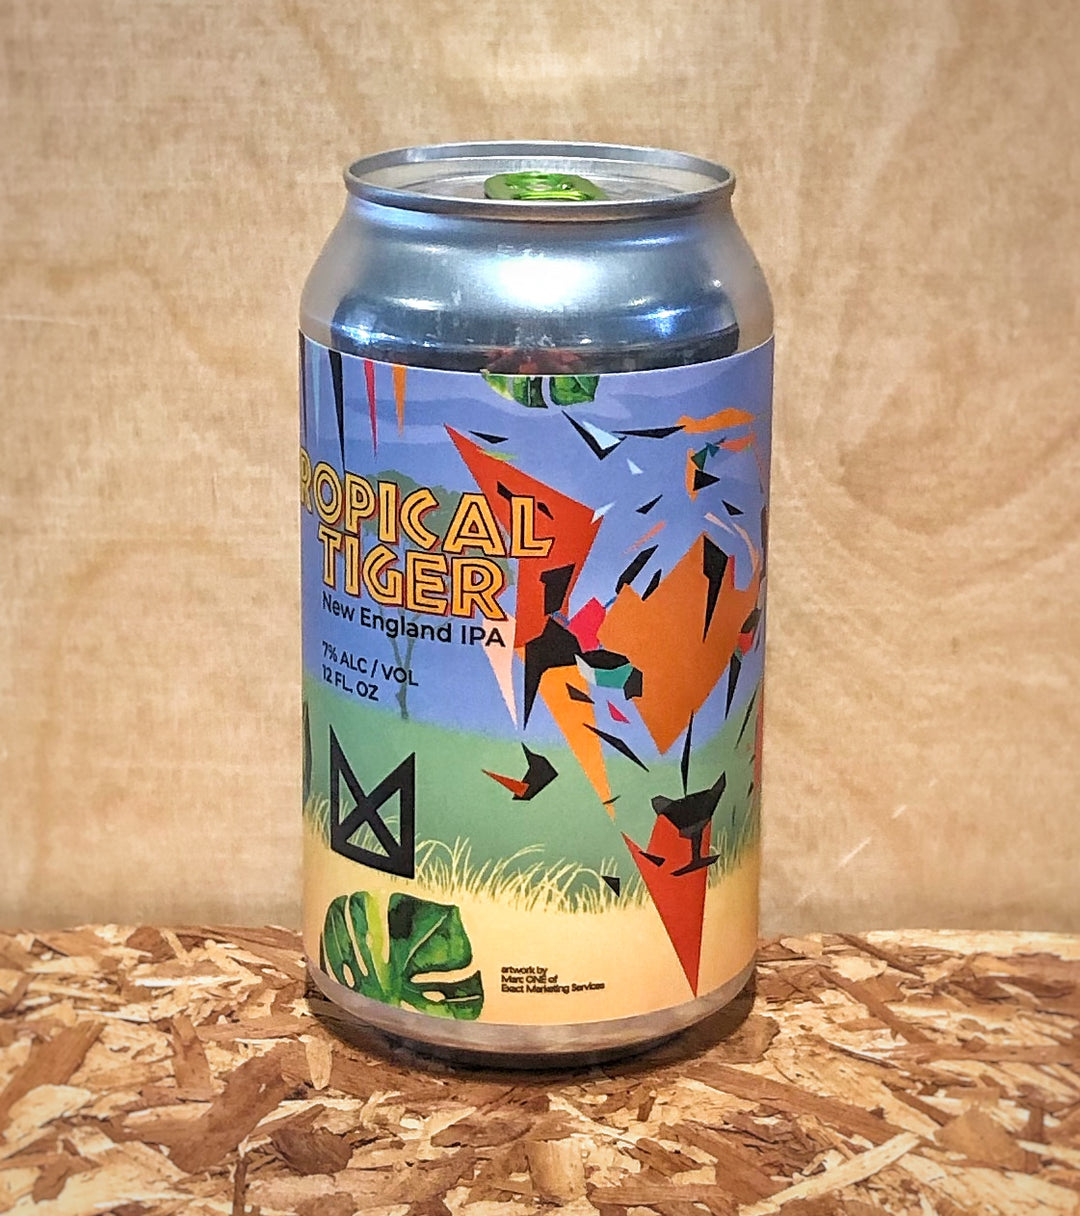 Marz Community Brewing 'Tropical Tiger' New England IPA (Chicago, IL)